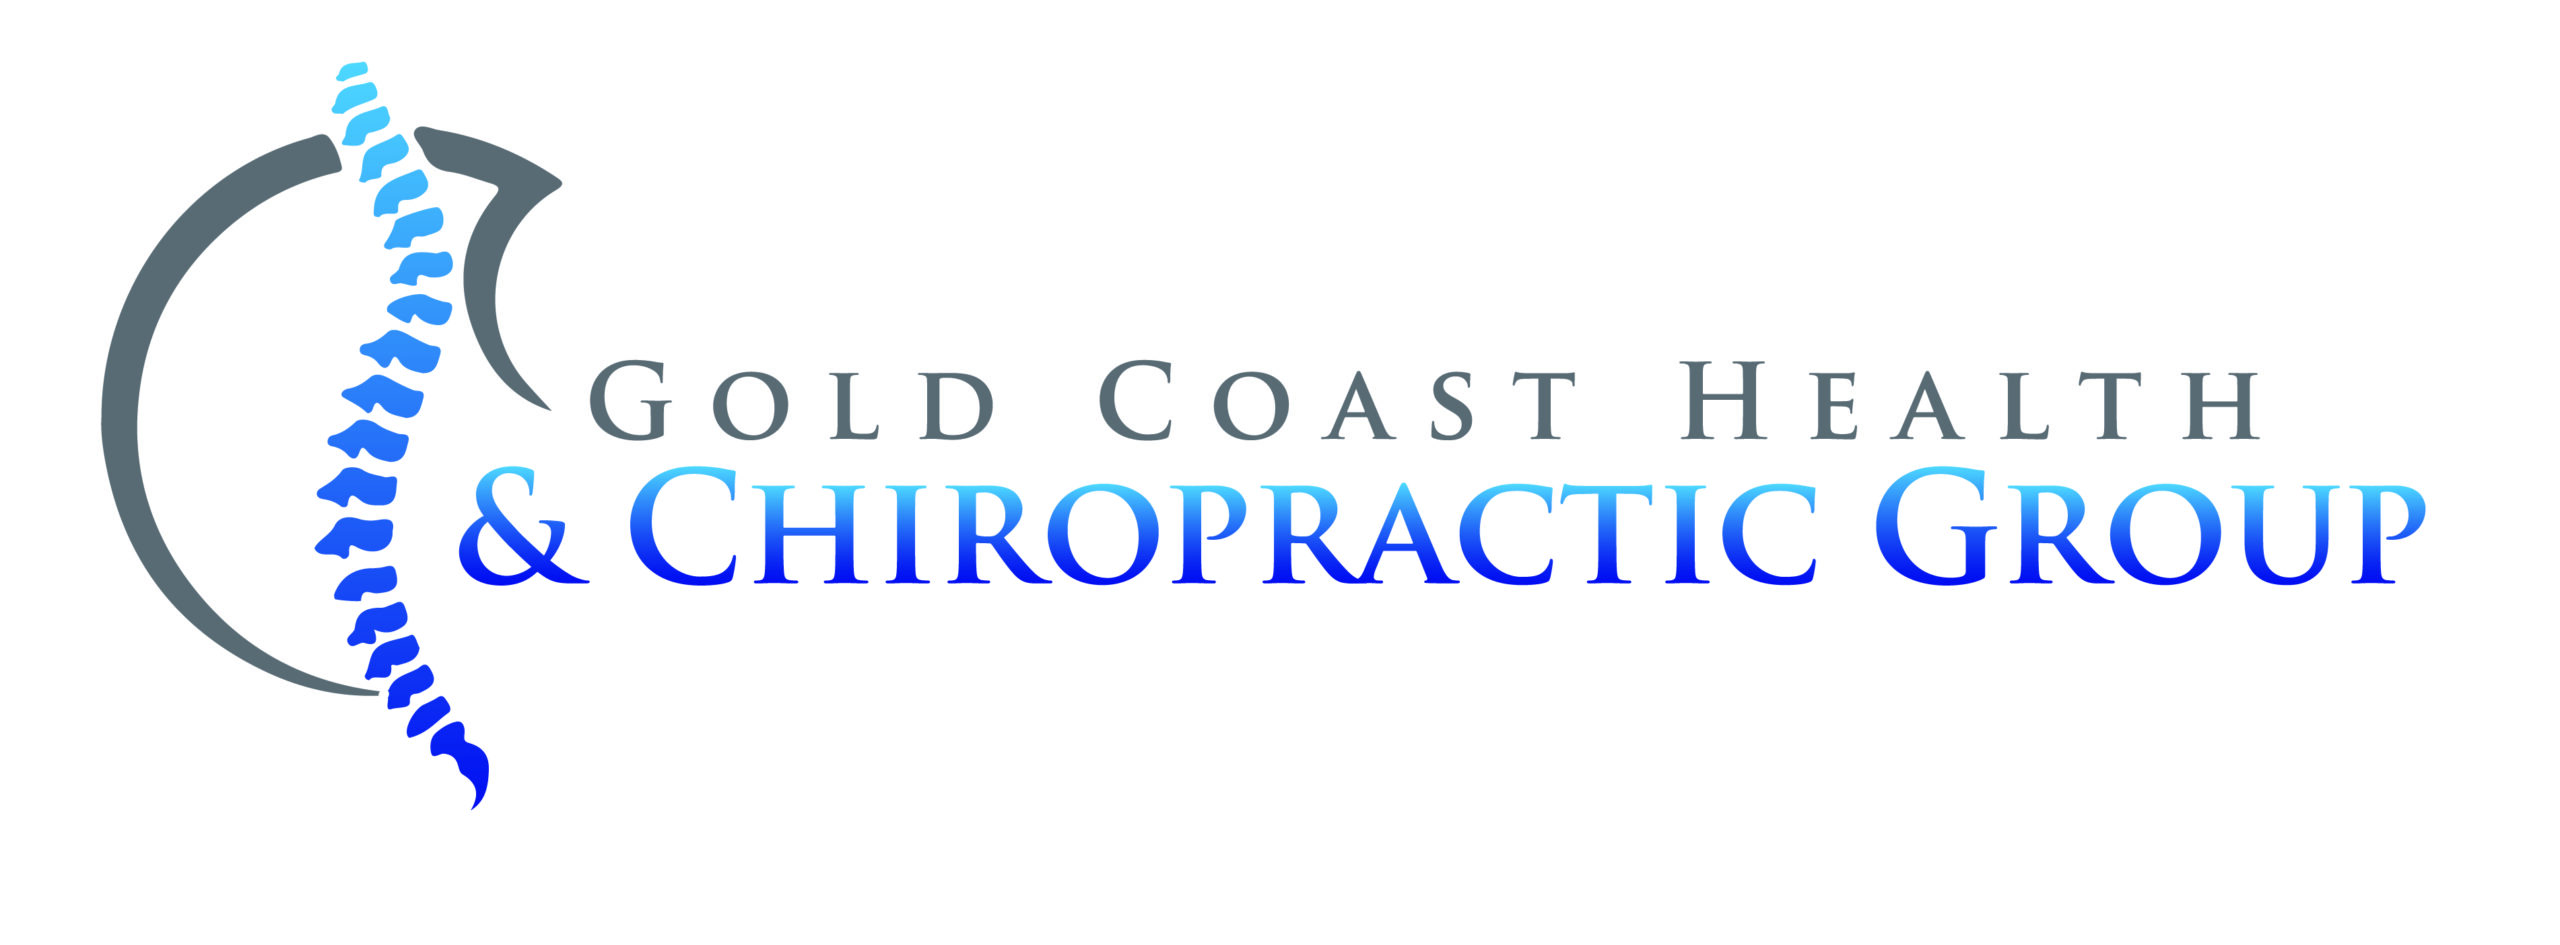 Gold Coast Health & Chiropractic Group